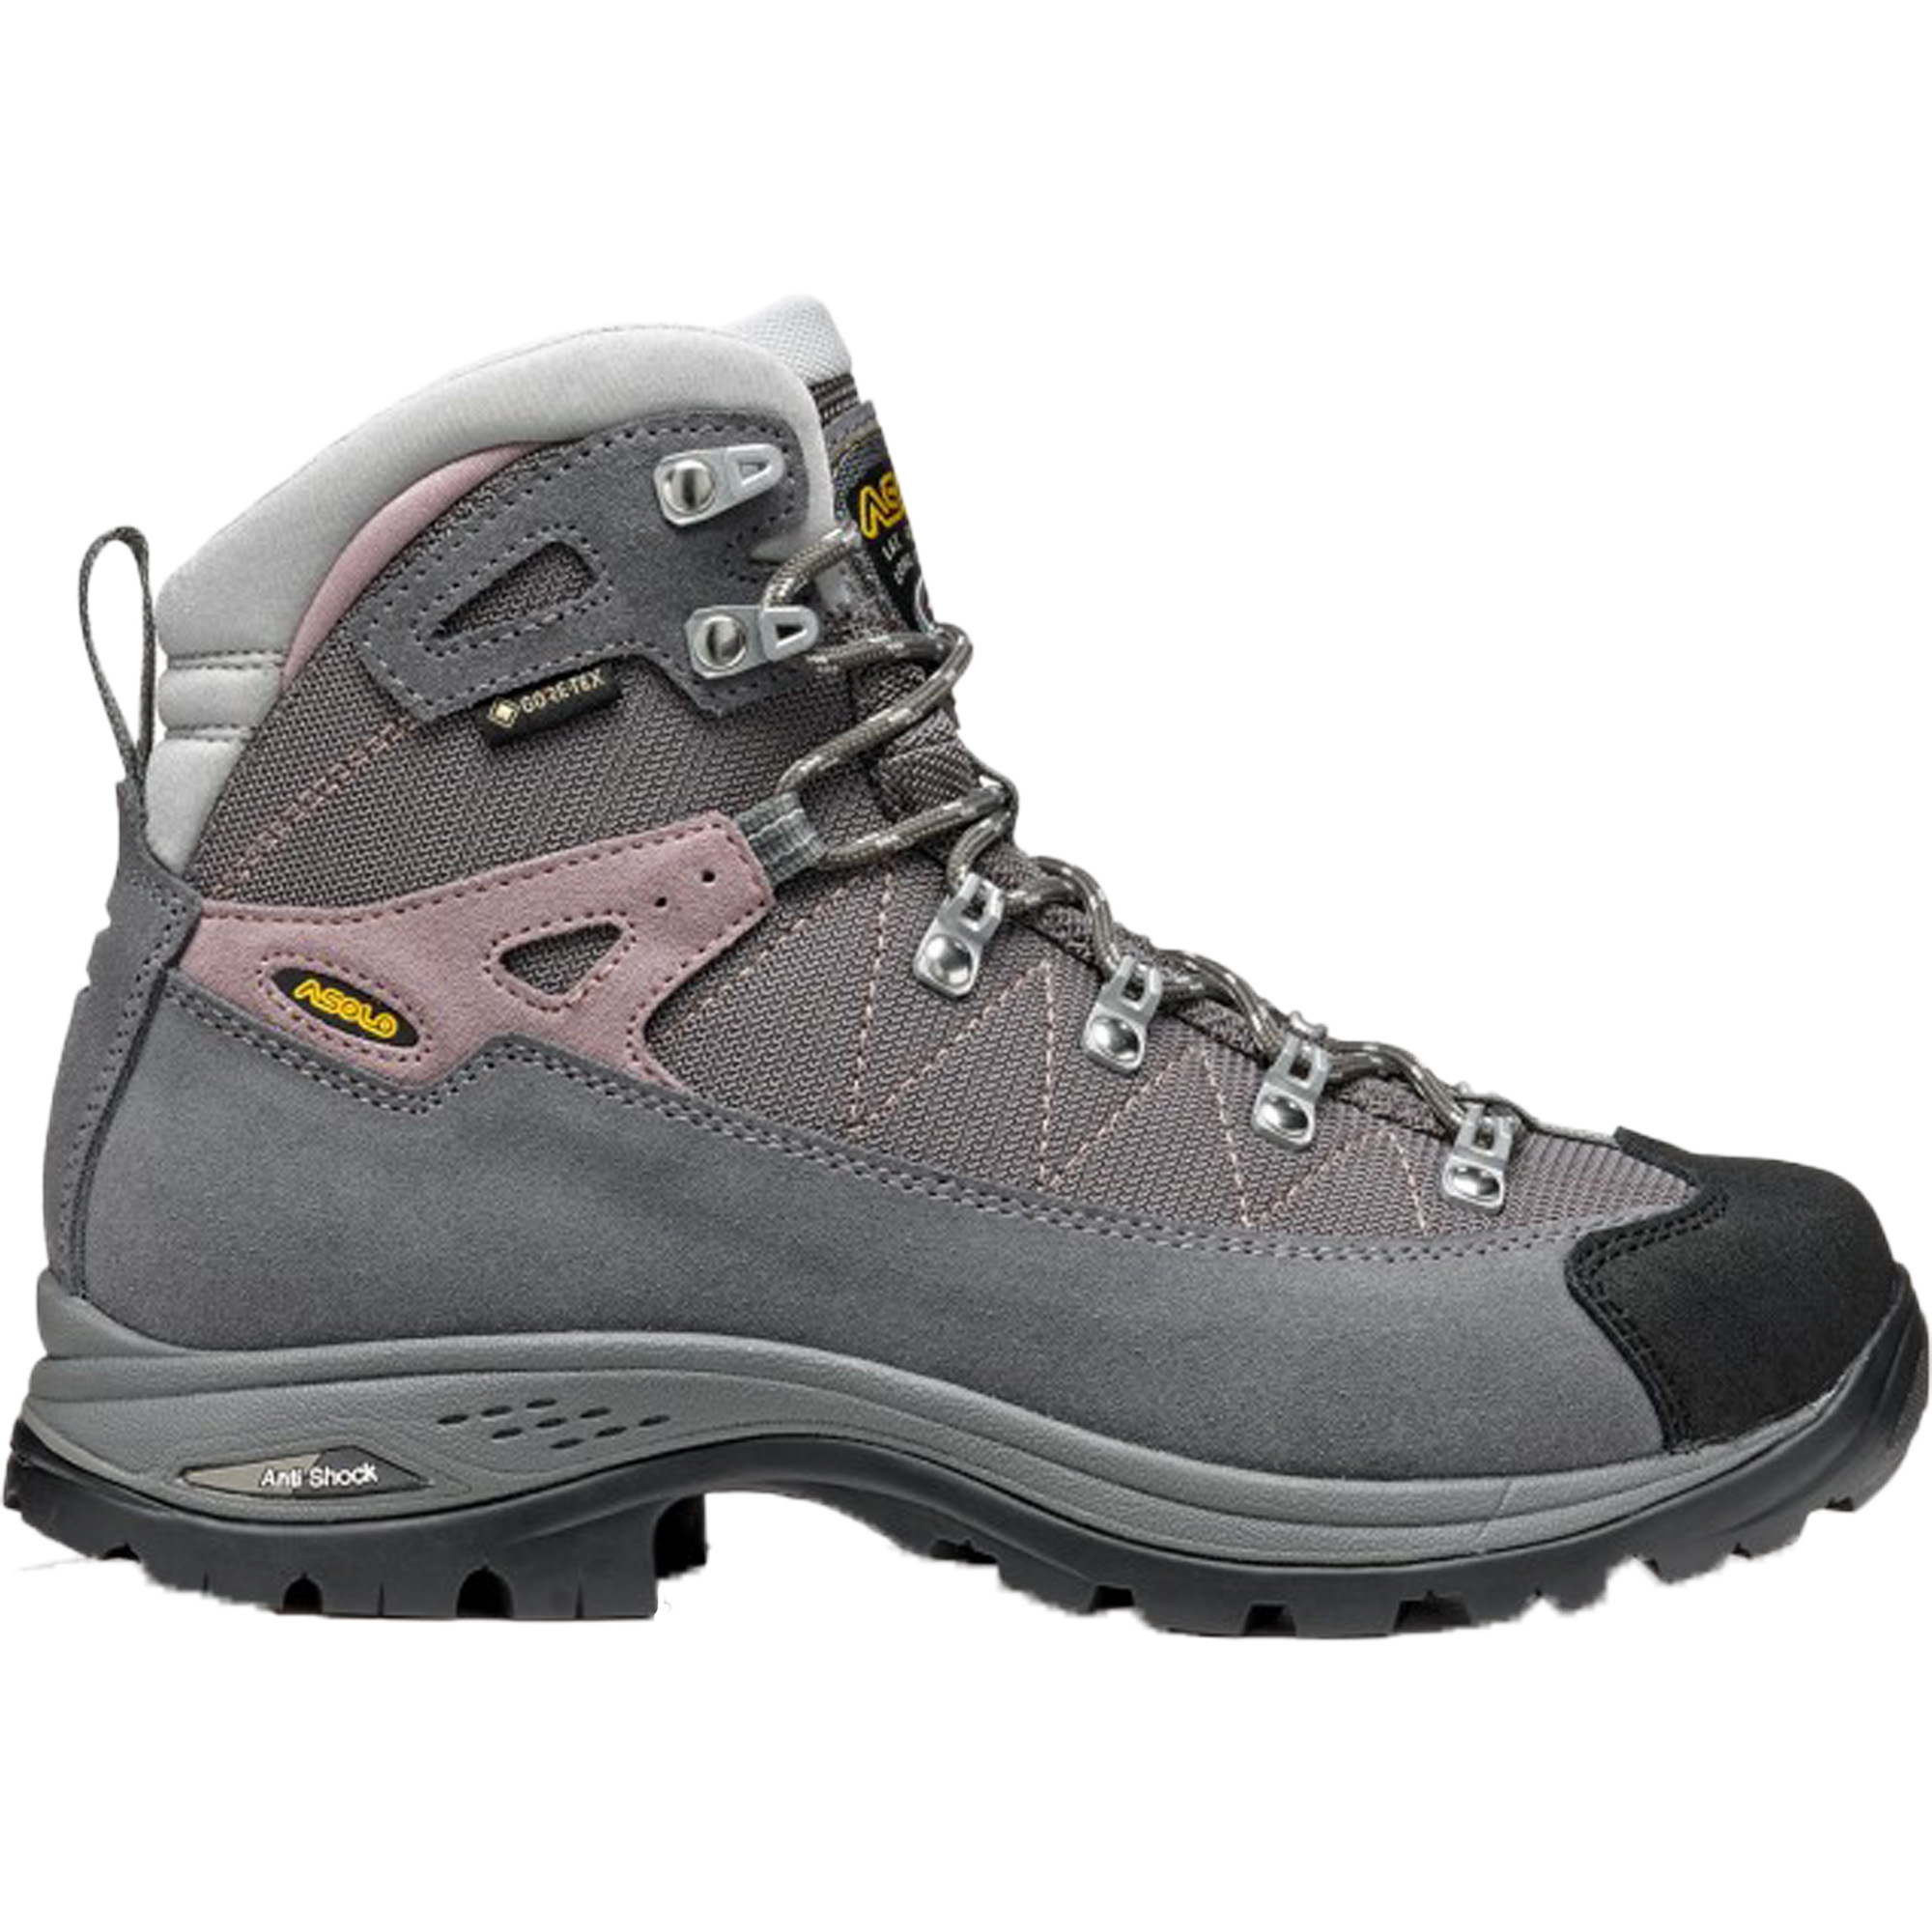 Asolo Finder GV Gore-tex Women's Hiking Boots